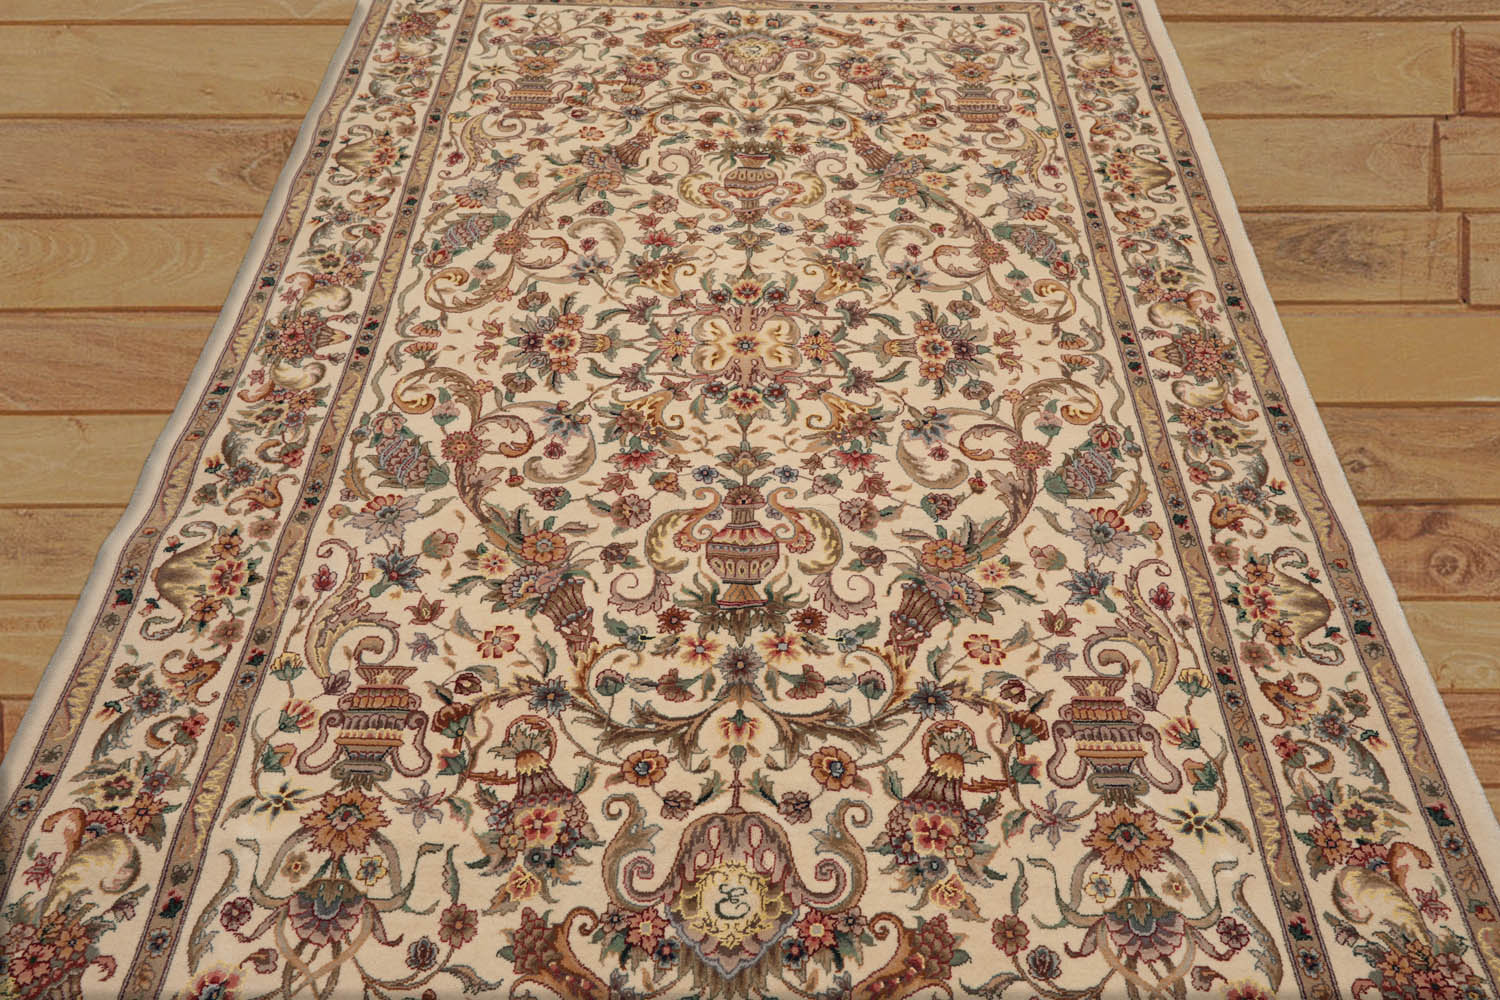 Annunziata 6x9 Hand Knotted Sino Persian Wool and Silk Traditional Oriental Area Rug Ivory, Tan Color